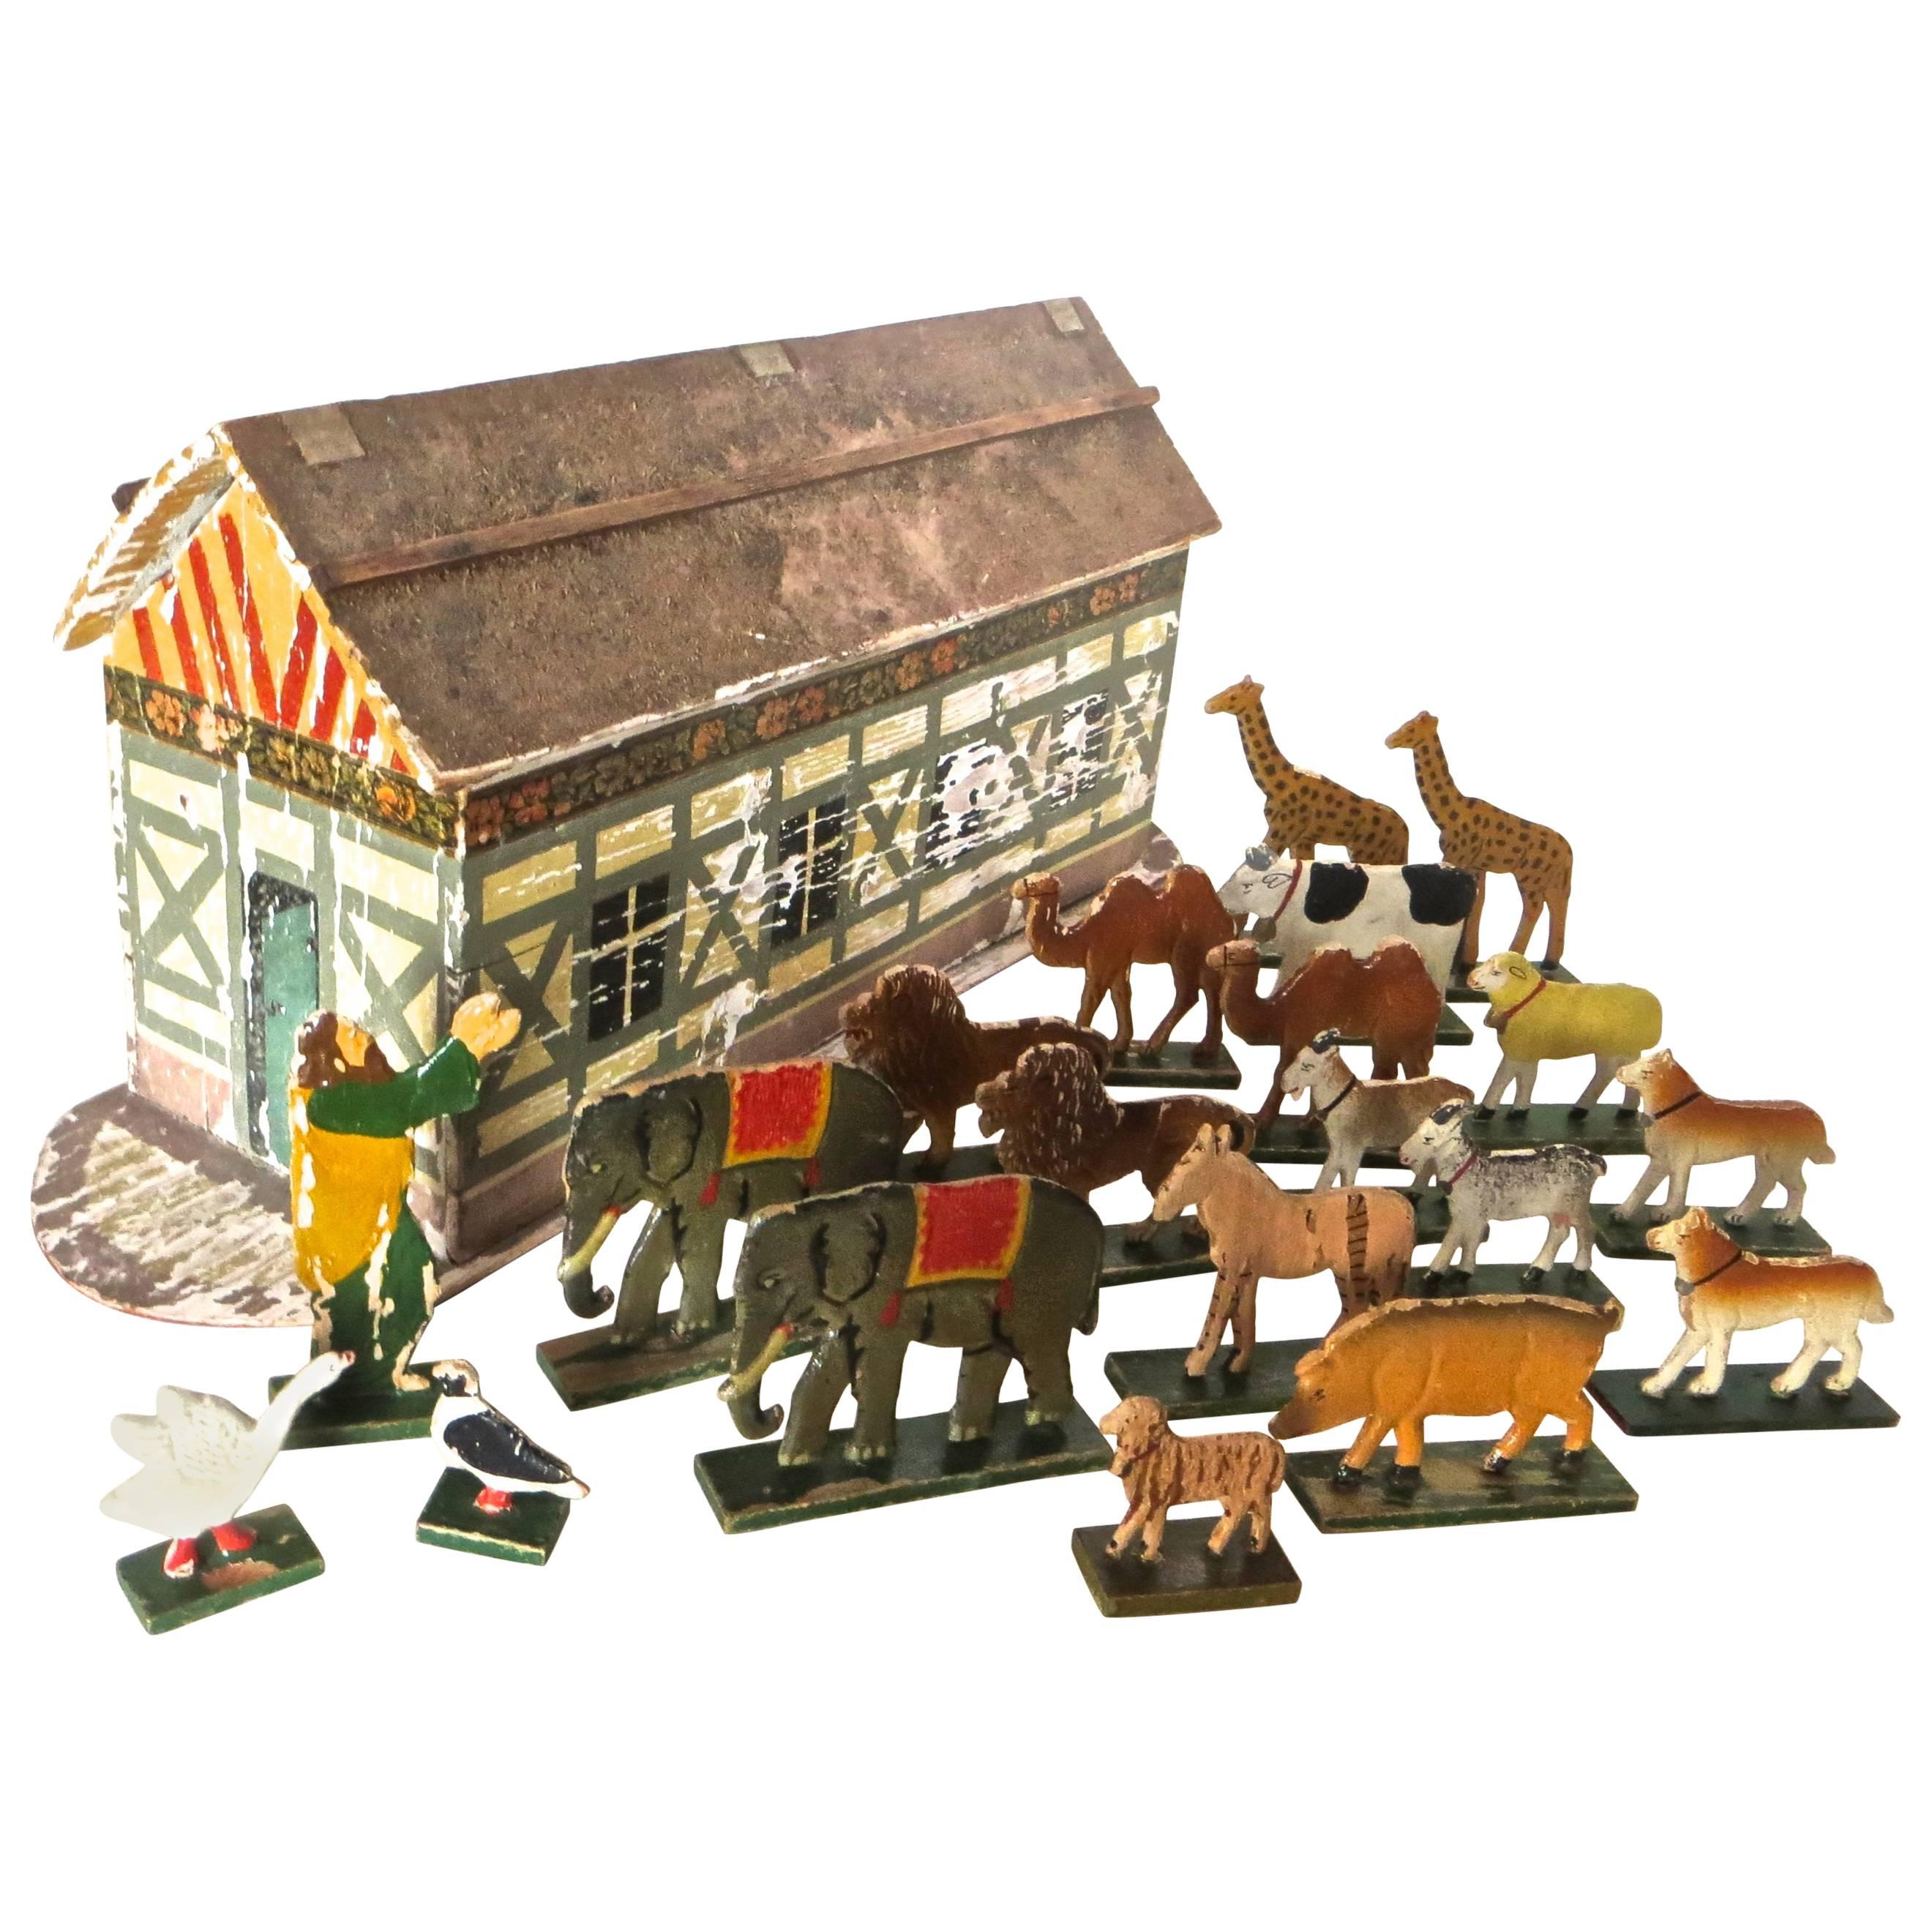 Late 19th Century Flat Bottom Toy Noah's Ark with 20 Animals, German